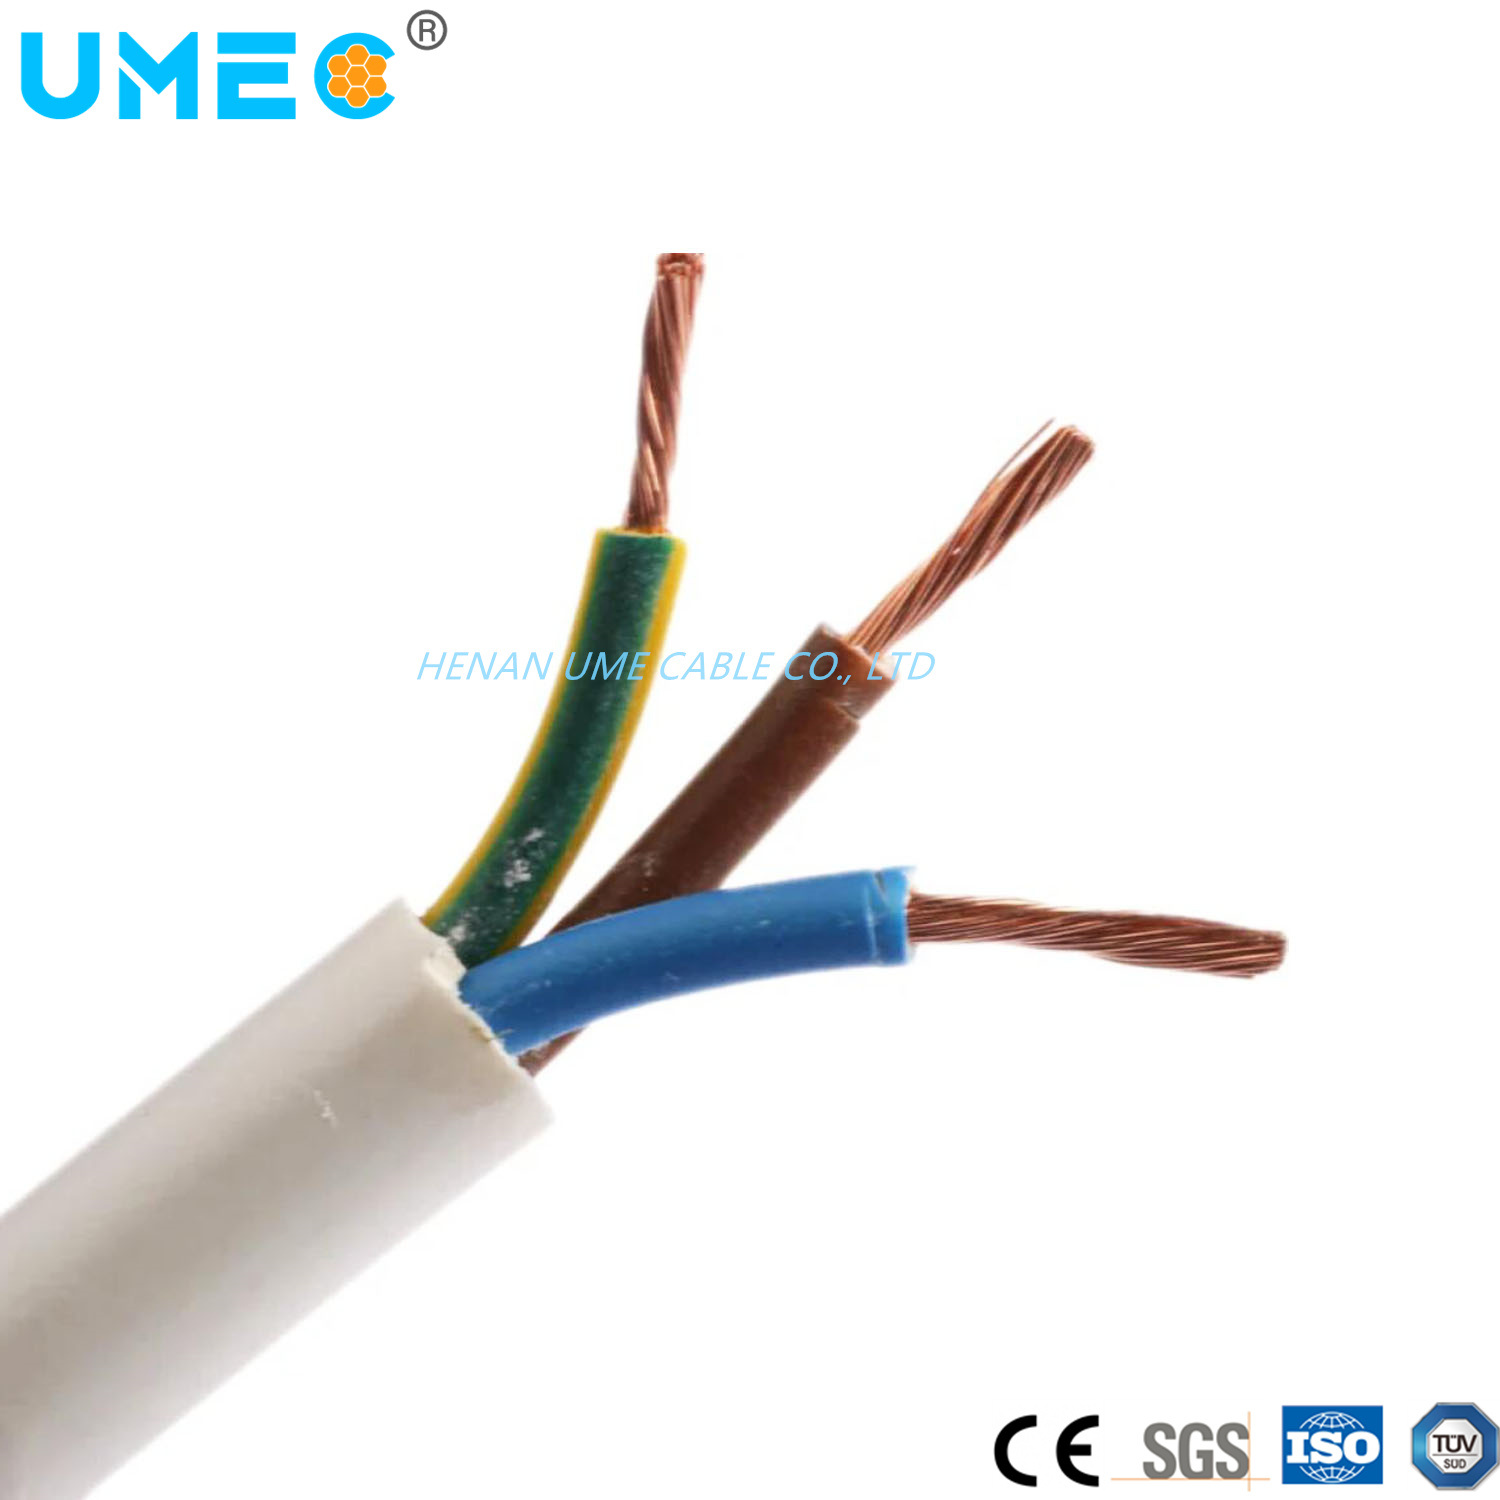 IEC60227 Rvv High Quality Multi-Core 2 3 4 5 Cores 1.5mm2 2.5mm2 10mm2 Copper Wires H05VV-F Myym Flexible Electrical Cable